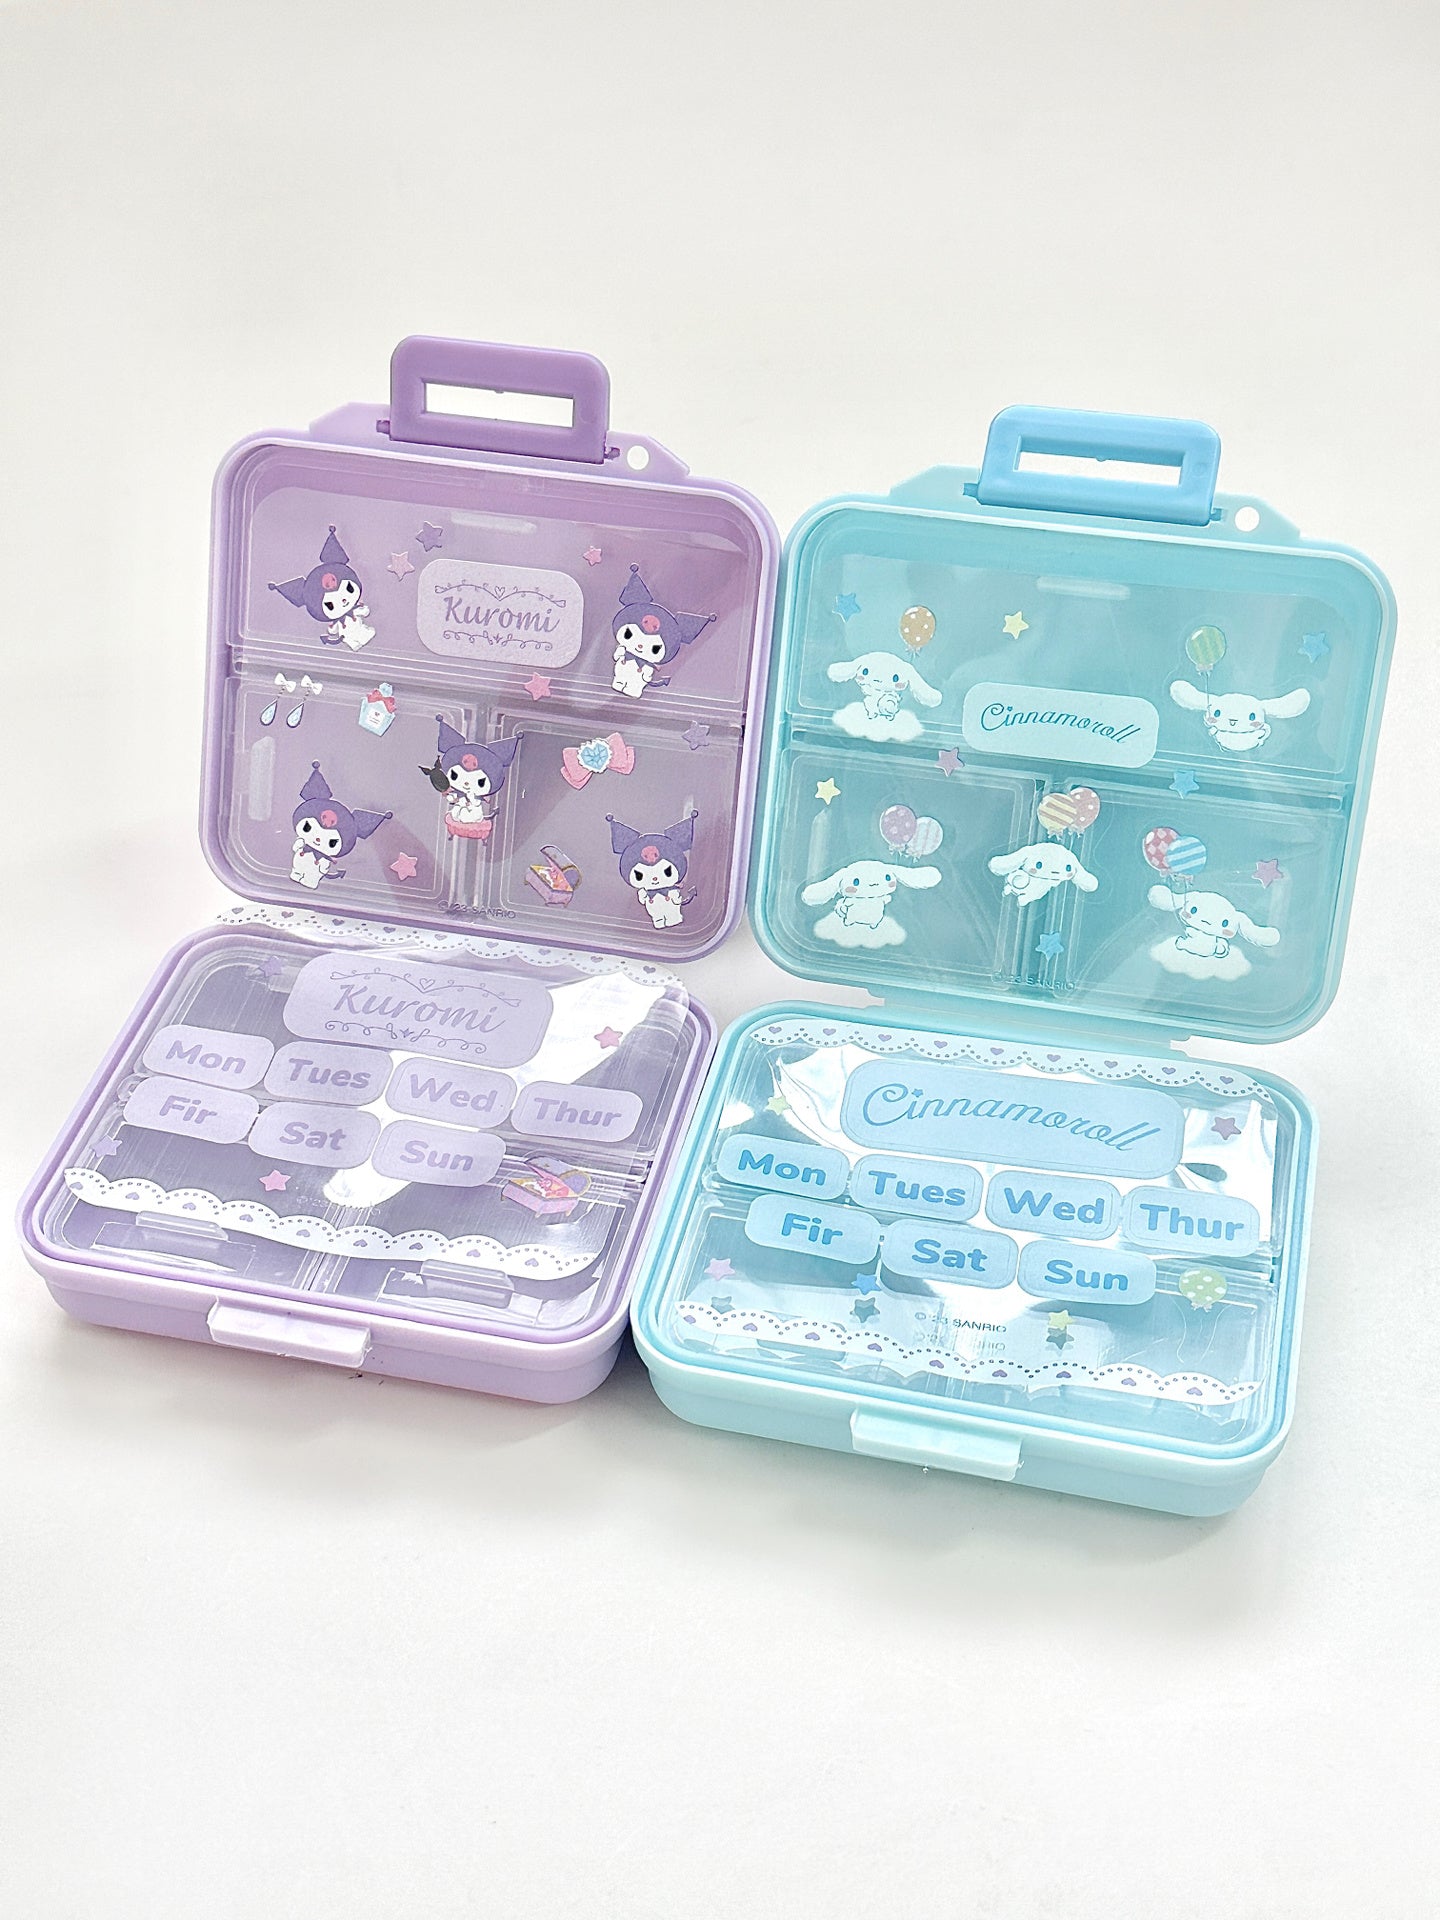 Sanrio Cute Pill Organizer-Pill Boxes for Travel Pill case Vitamins Fish Oil Supplements Medication Organizer Dispenser for Fish Oils Vitamin Holder Supplement